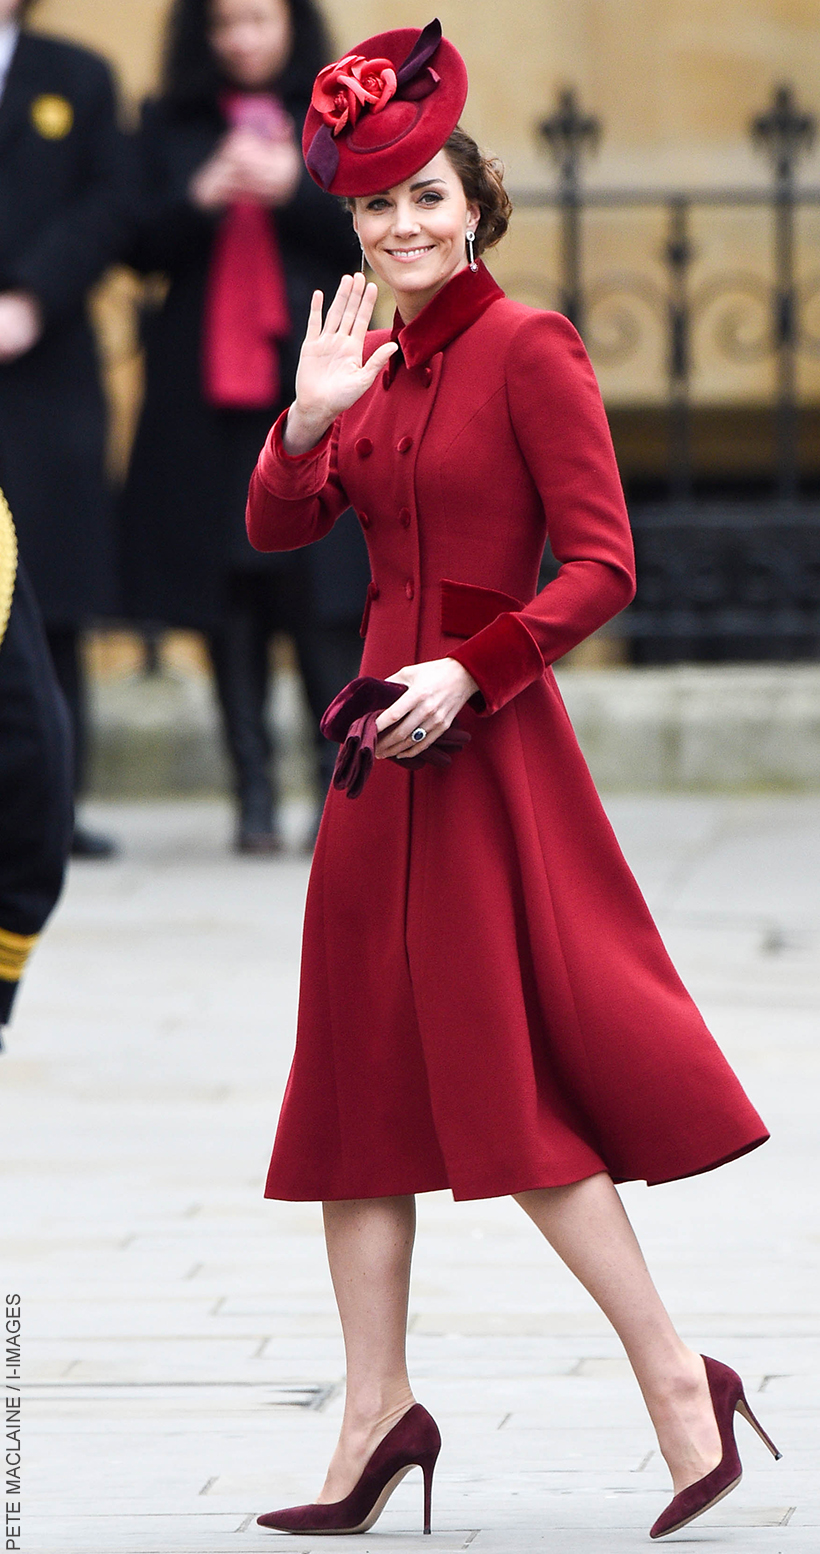 The then Duchess of Cambridge chose another red coat dress for Commonwealth Day in 2020